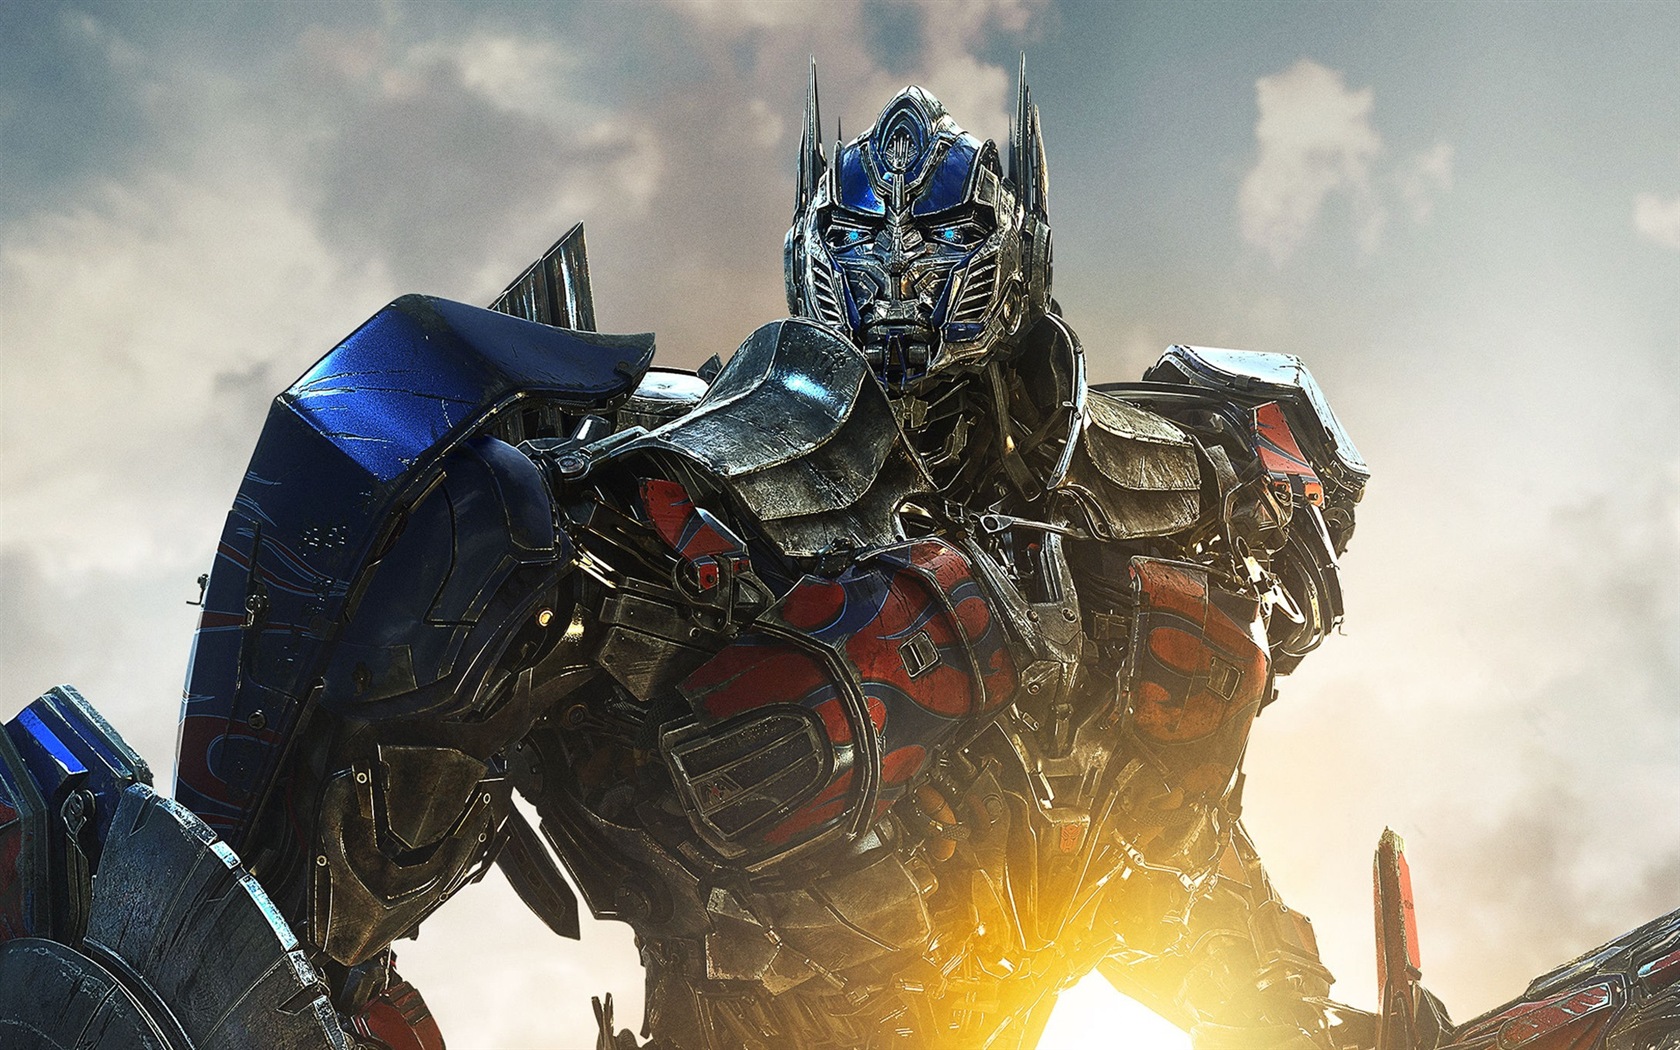 2014 Transformers: Age of Extinction HD tapety #2 - 1680x1050